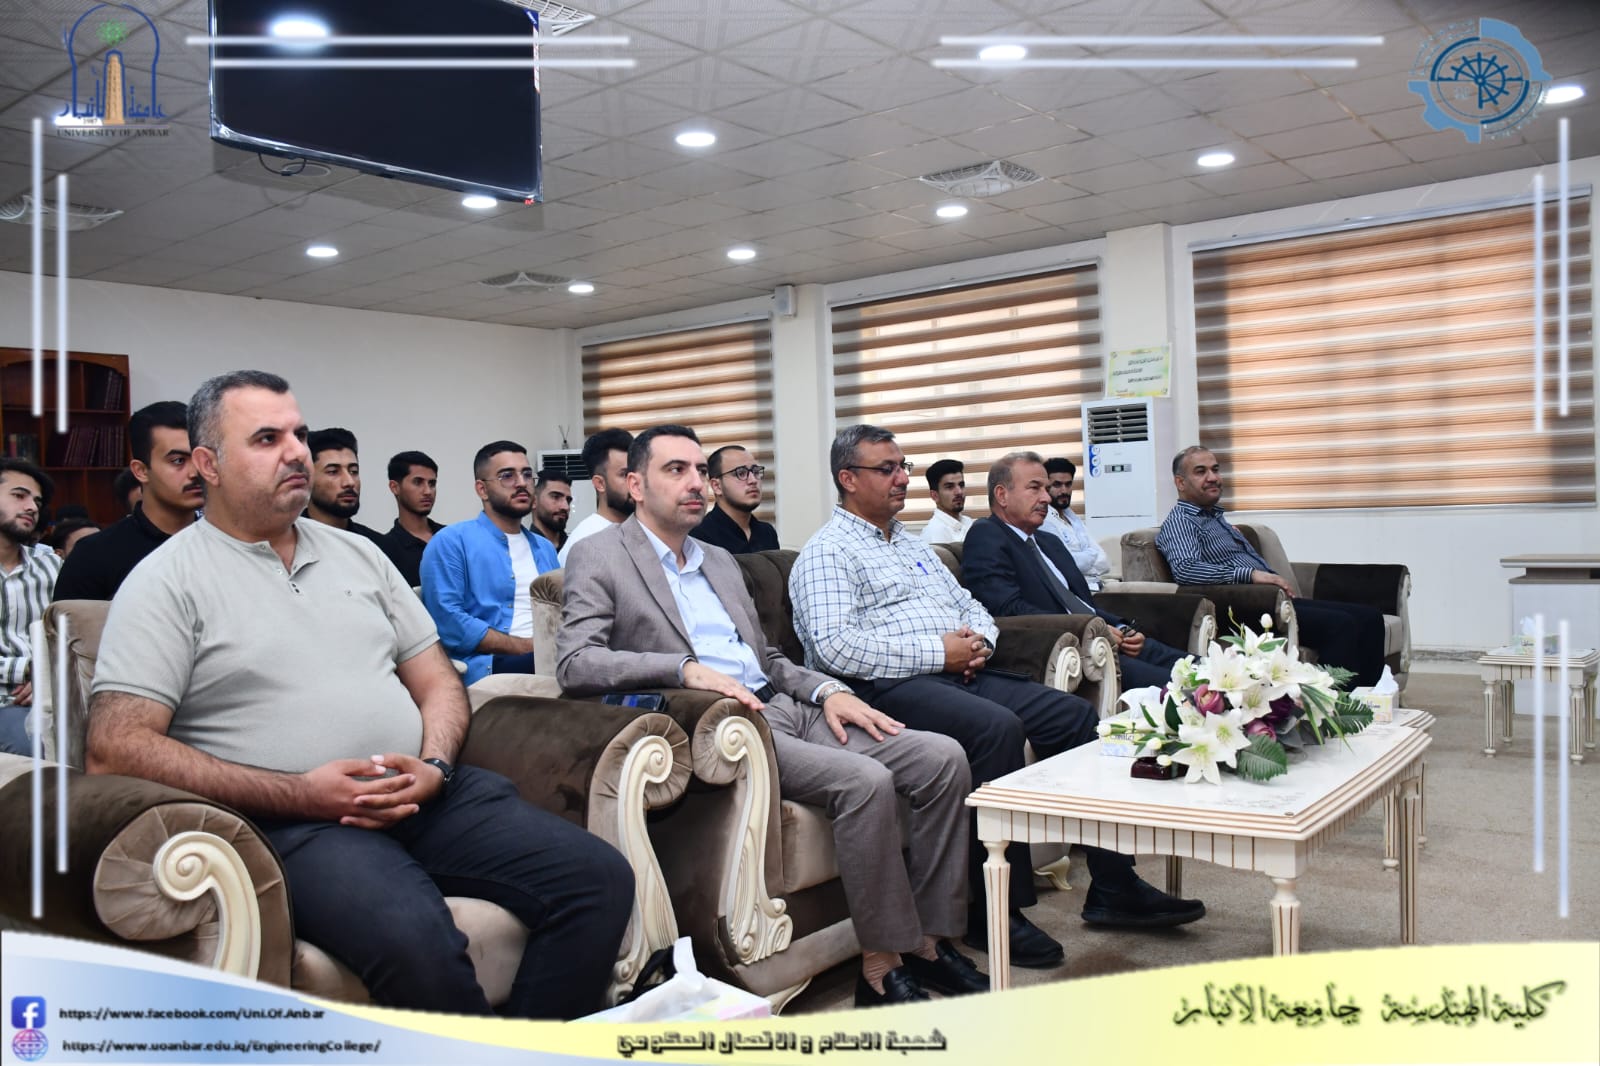 The Department of Civil Engineering - College of Engineering - Anbar University, in cooperation with the Psychological Counseling and Educational Guidance Unit at the college